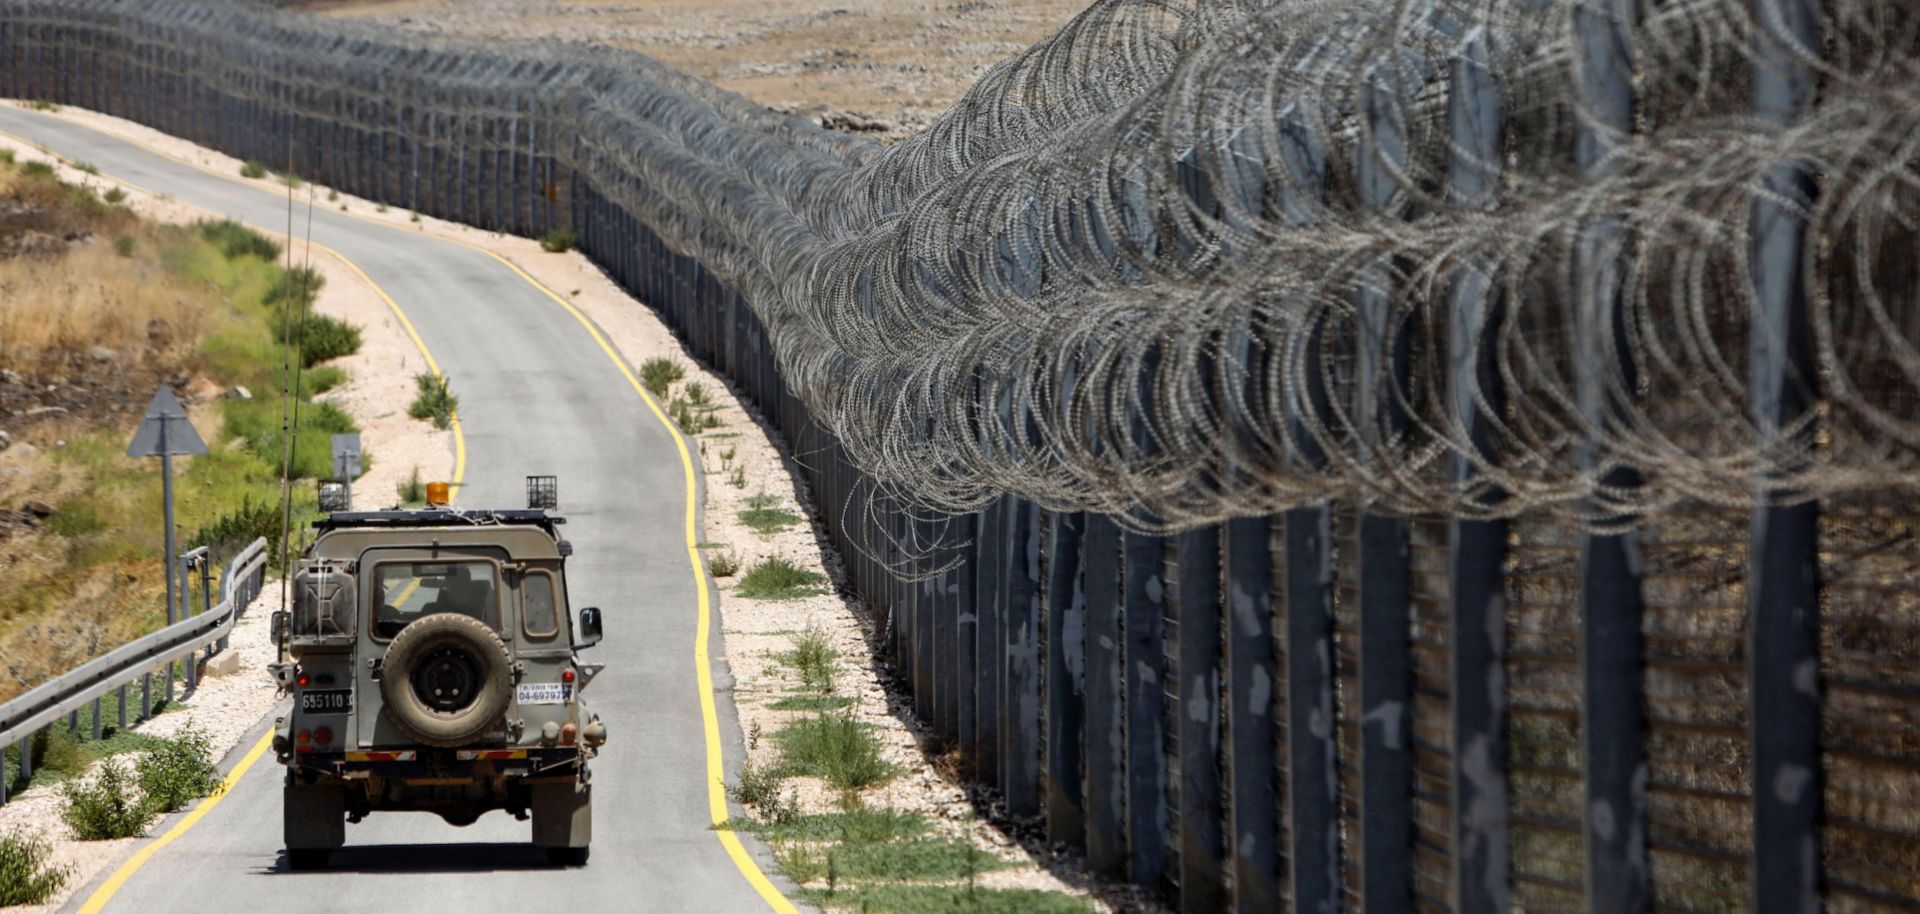 An Israeli army vehicle drives on the road along the border fence that separates the Israeli-annexed Golan Heights and Syria on July 19, 2017.